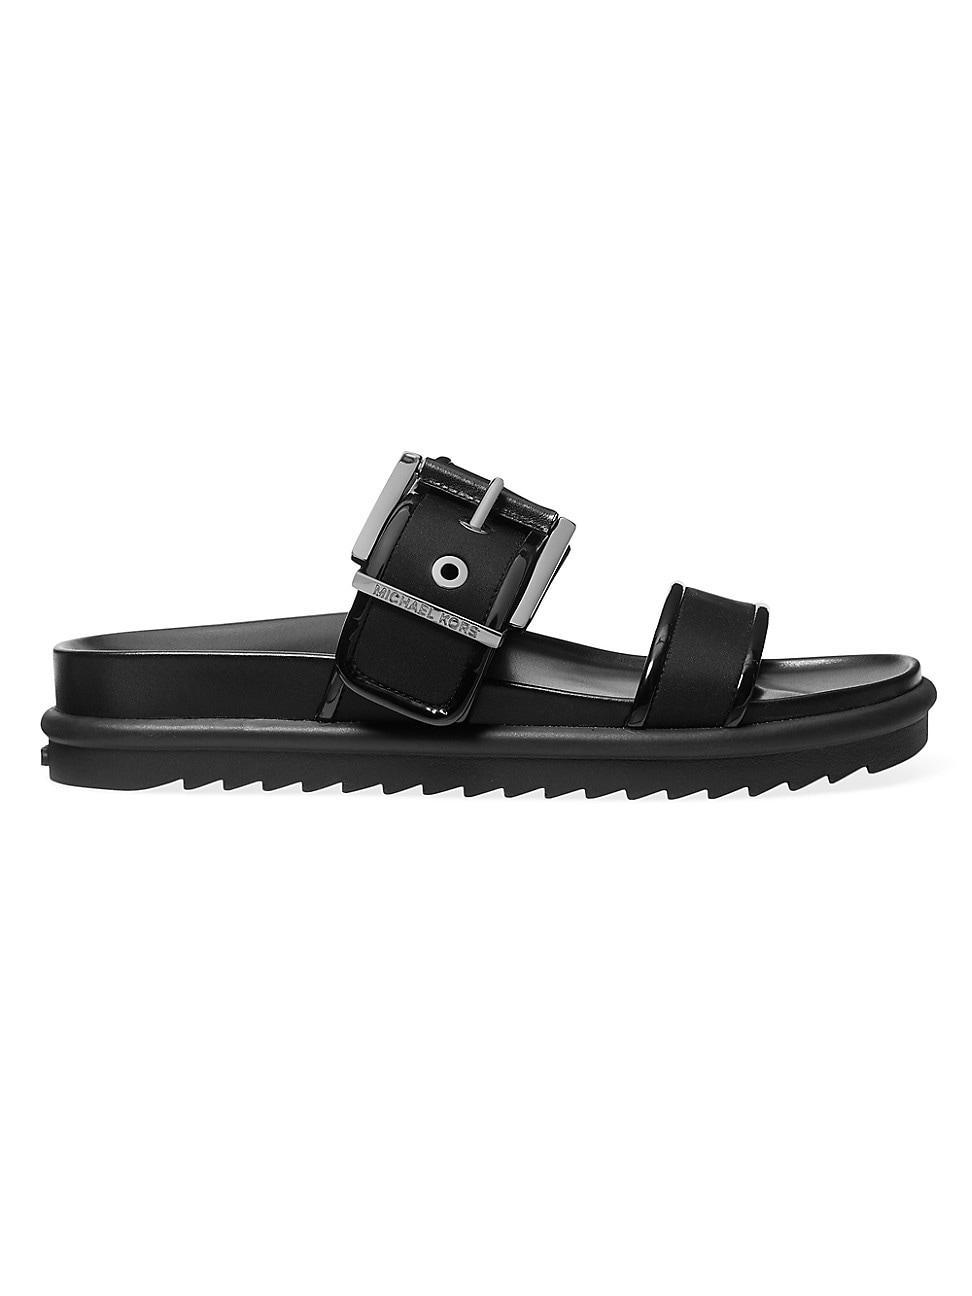 Womens Colby Buckle-Accented Slide Sandals Product Image